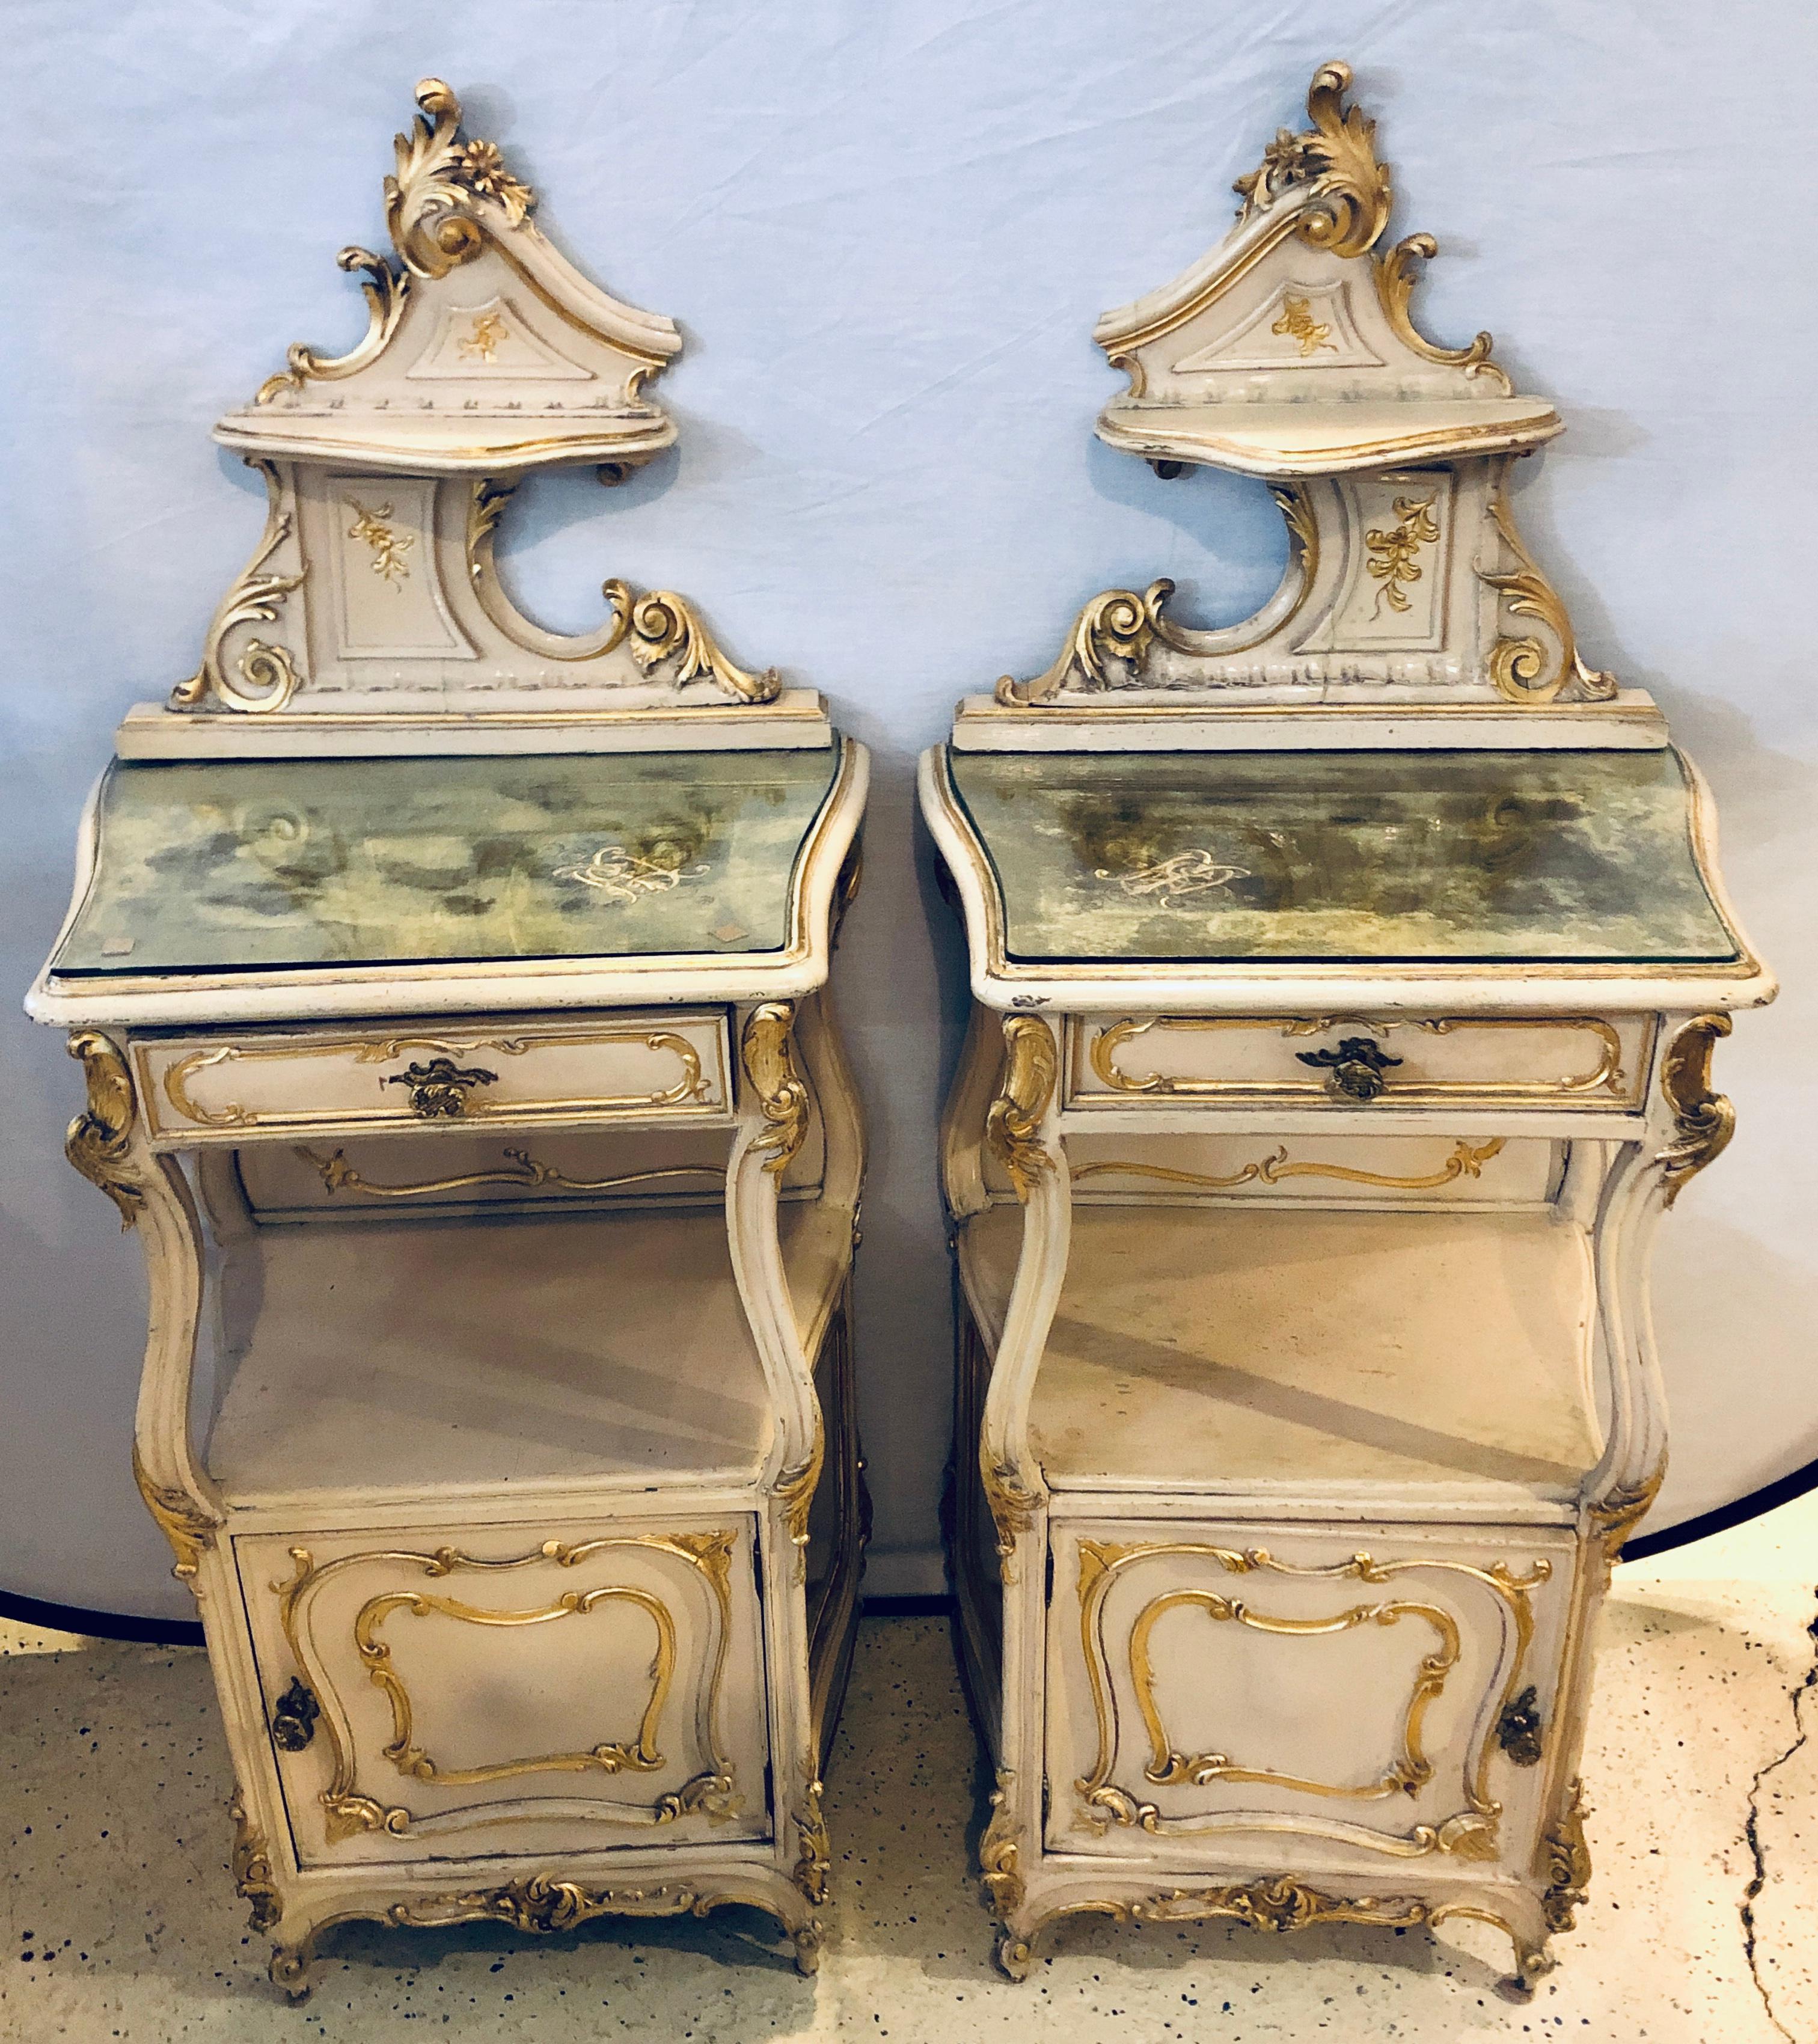 Pair of Louis XV style painted cabinets, nightstands or end tables. These finely constructed parcel gilt decorated and painted cabinets can be used in most any room of the home as they sit as nightstands, sofa tables, end tables or pedestals. The